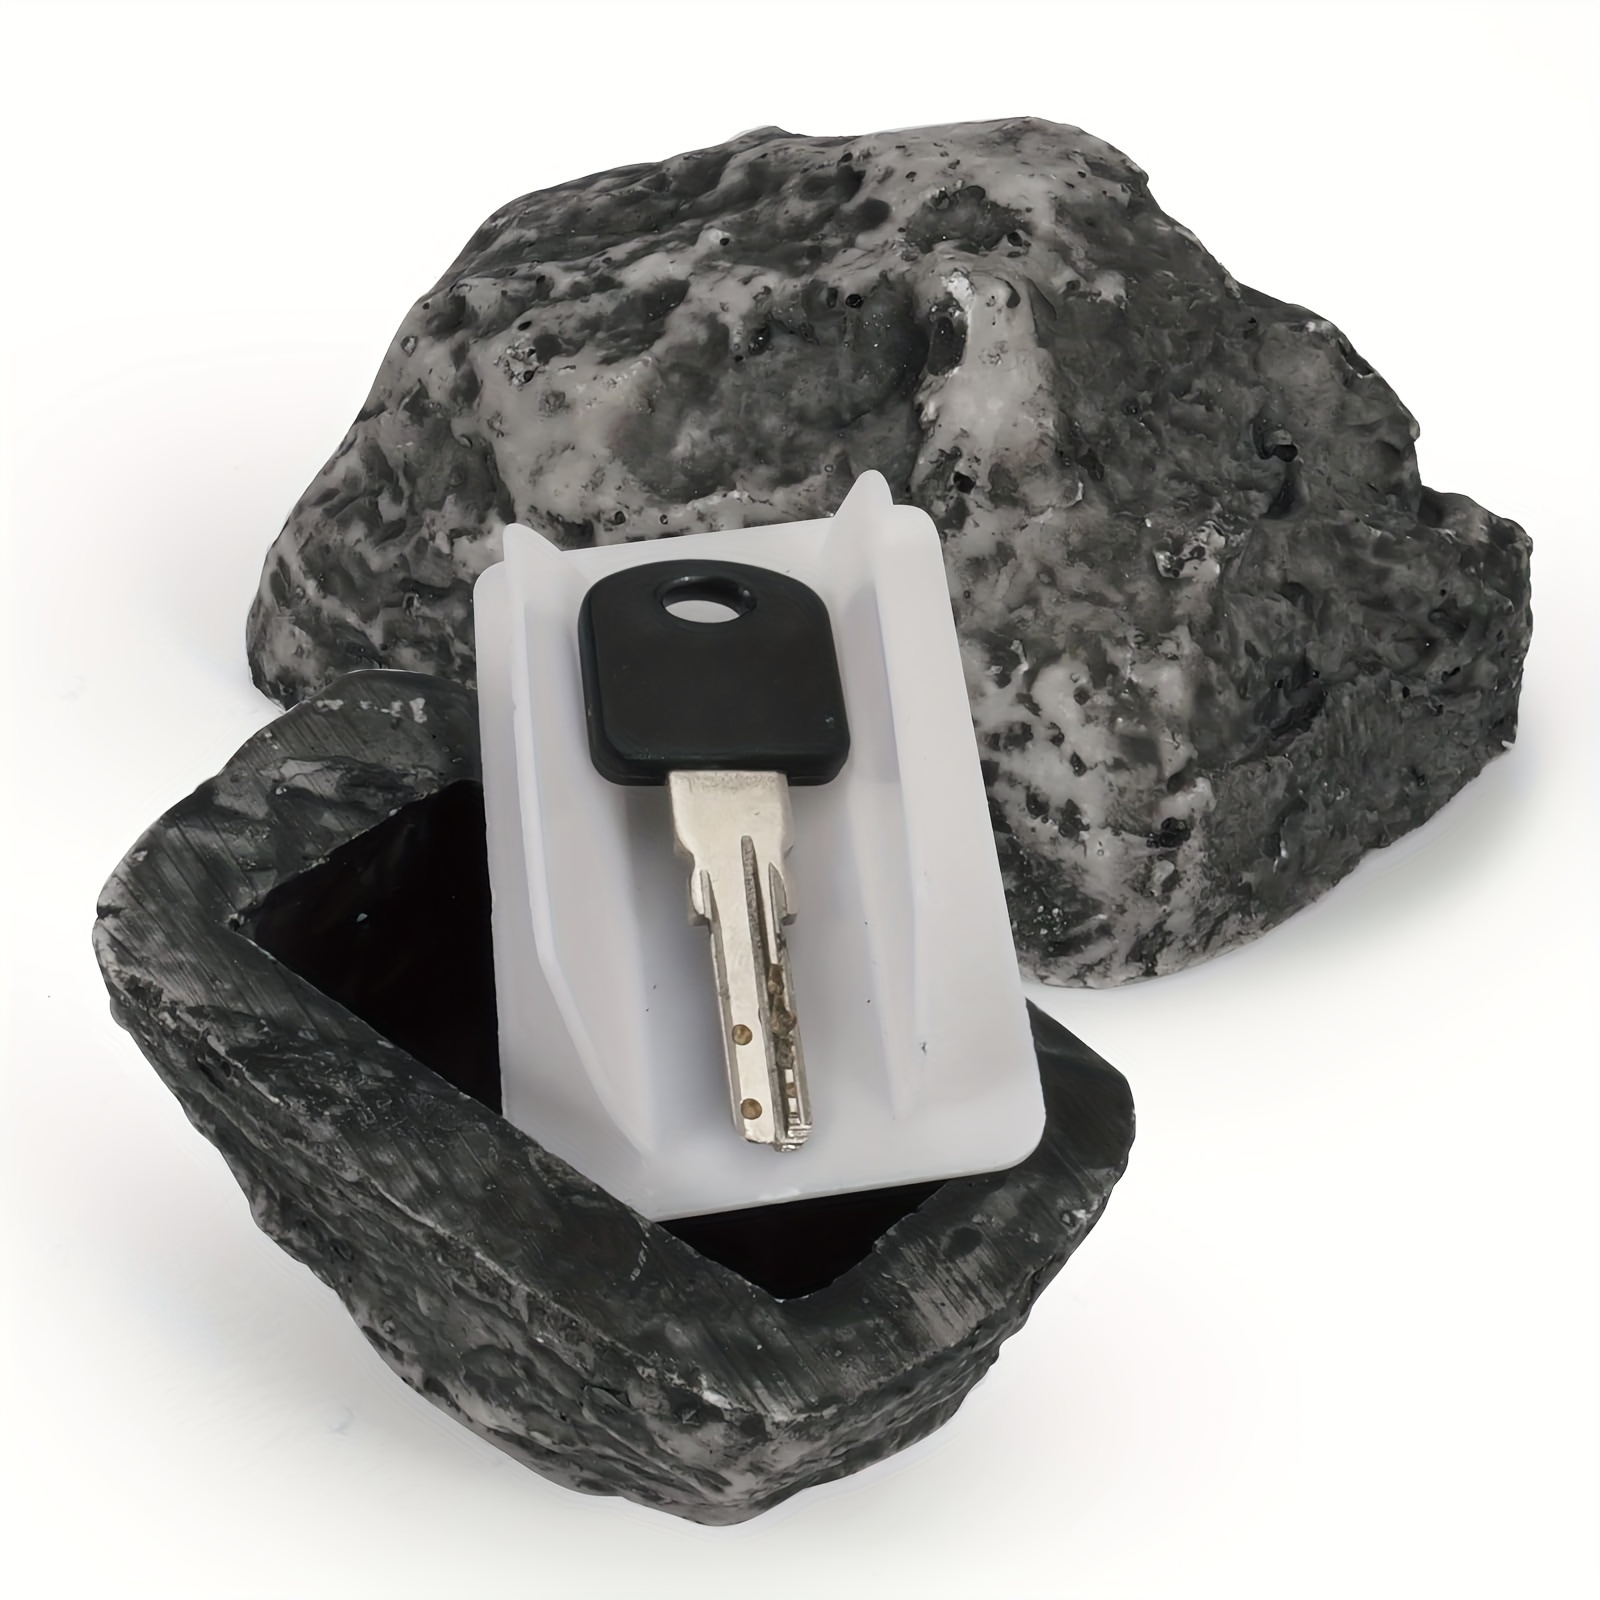 OUTDOOR ROCK HIDE A KEY HOUSE HOME Emergency Spare Key Car Holder Hider Safe  - Simpson Advanced Chiropractic & Medical Center